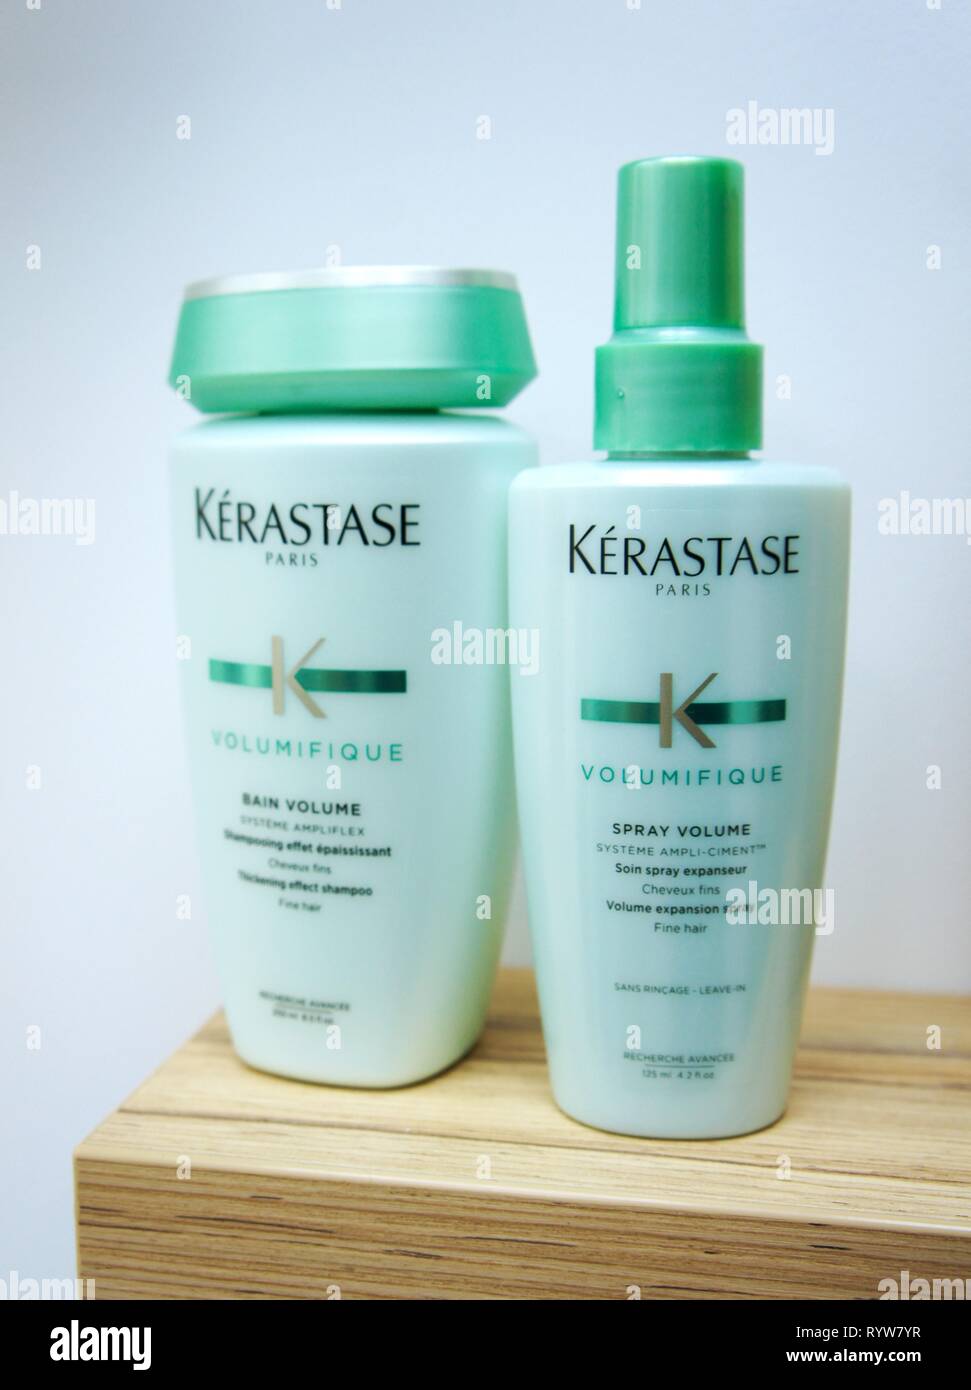 French luxury cosmetics for body, hair and face care. professional makeup  loreal kerastase Stock Photo - Alamy